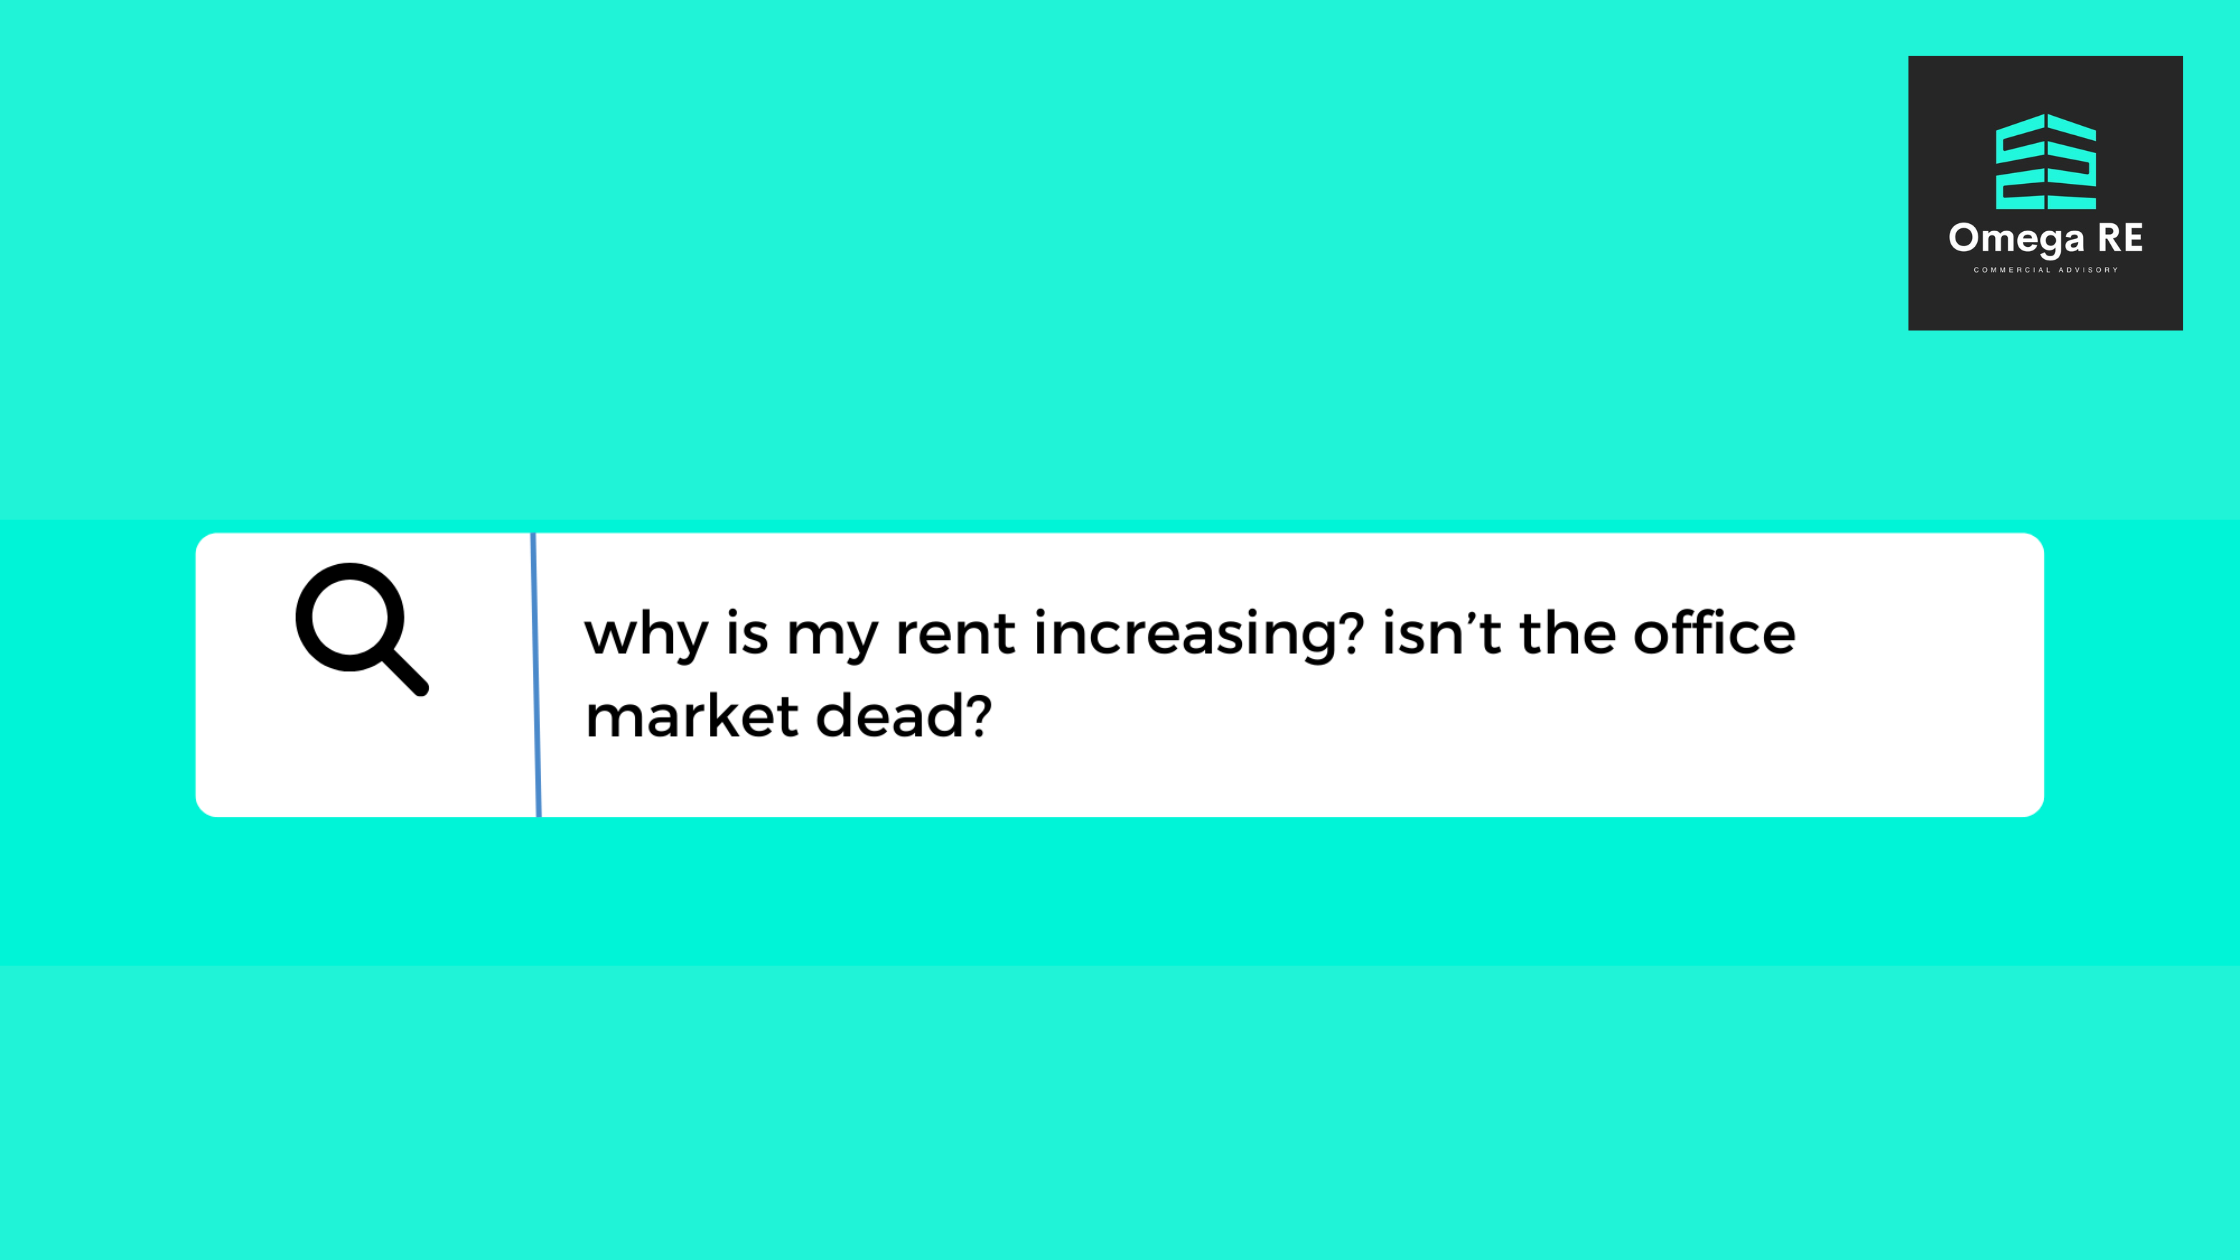 Why is my rent increasing? Isn’t the office market dead?